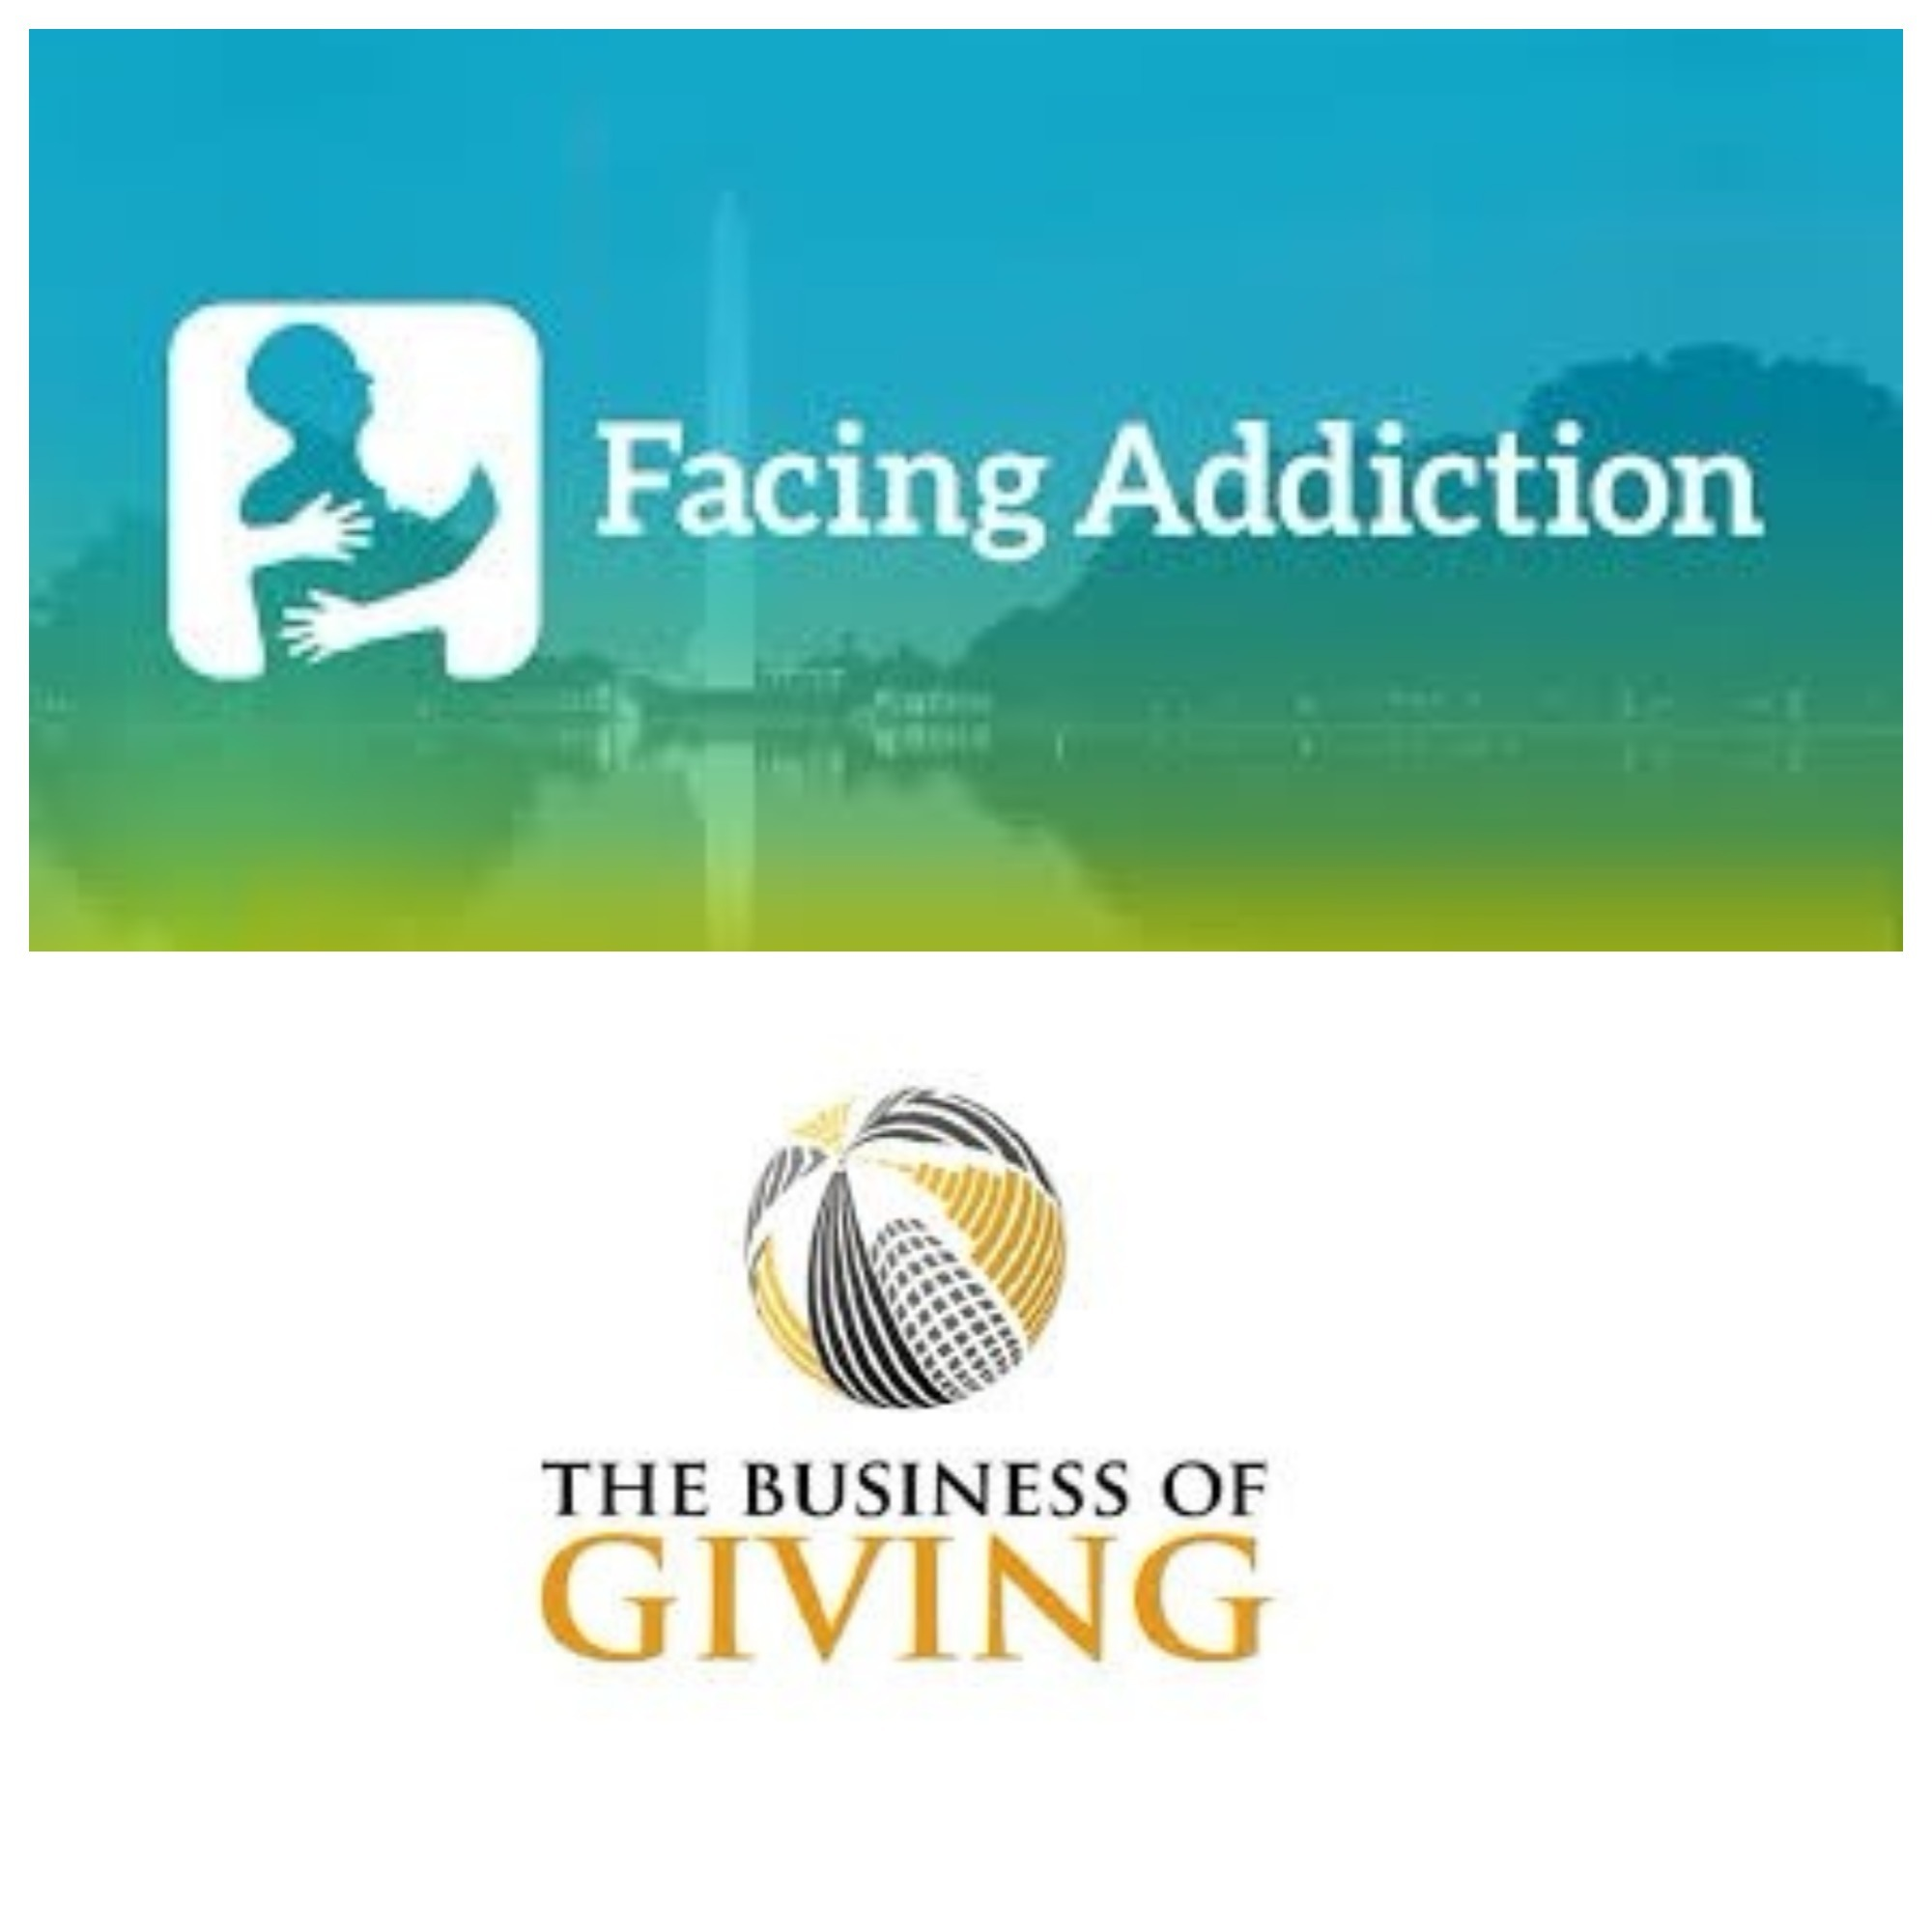  Jim Hood, Co-Founder and CEO of Facing Addiction